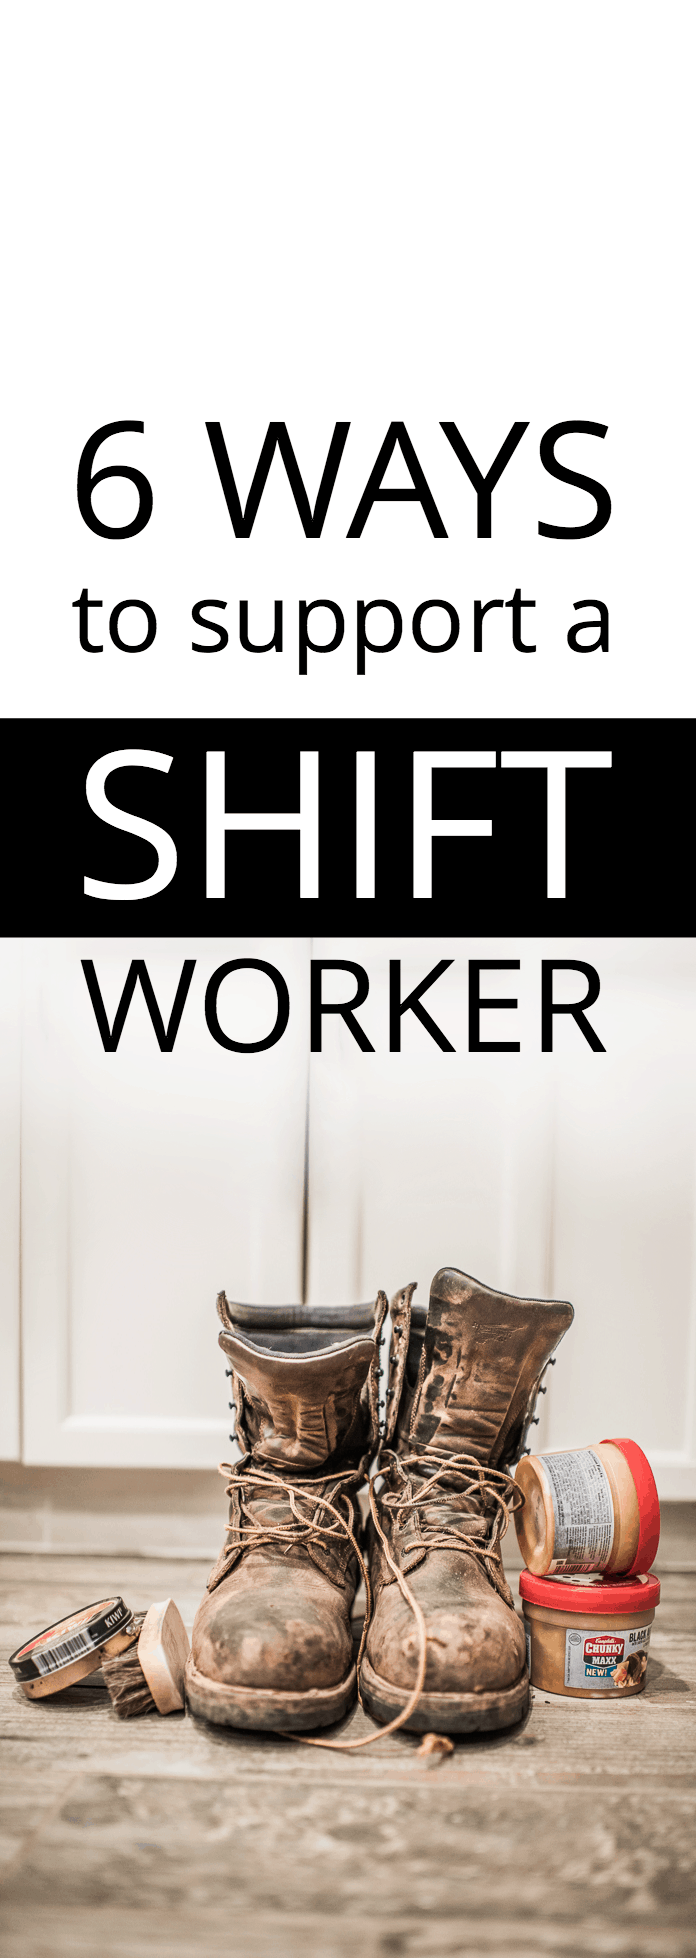 Making a shift schedule worker's life easier